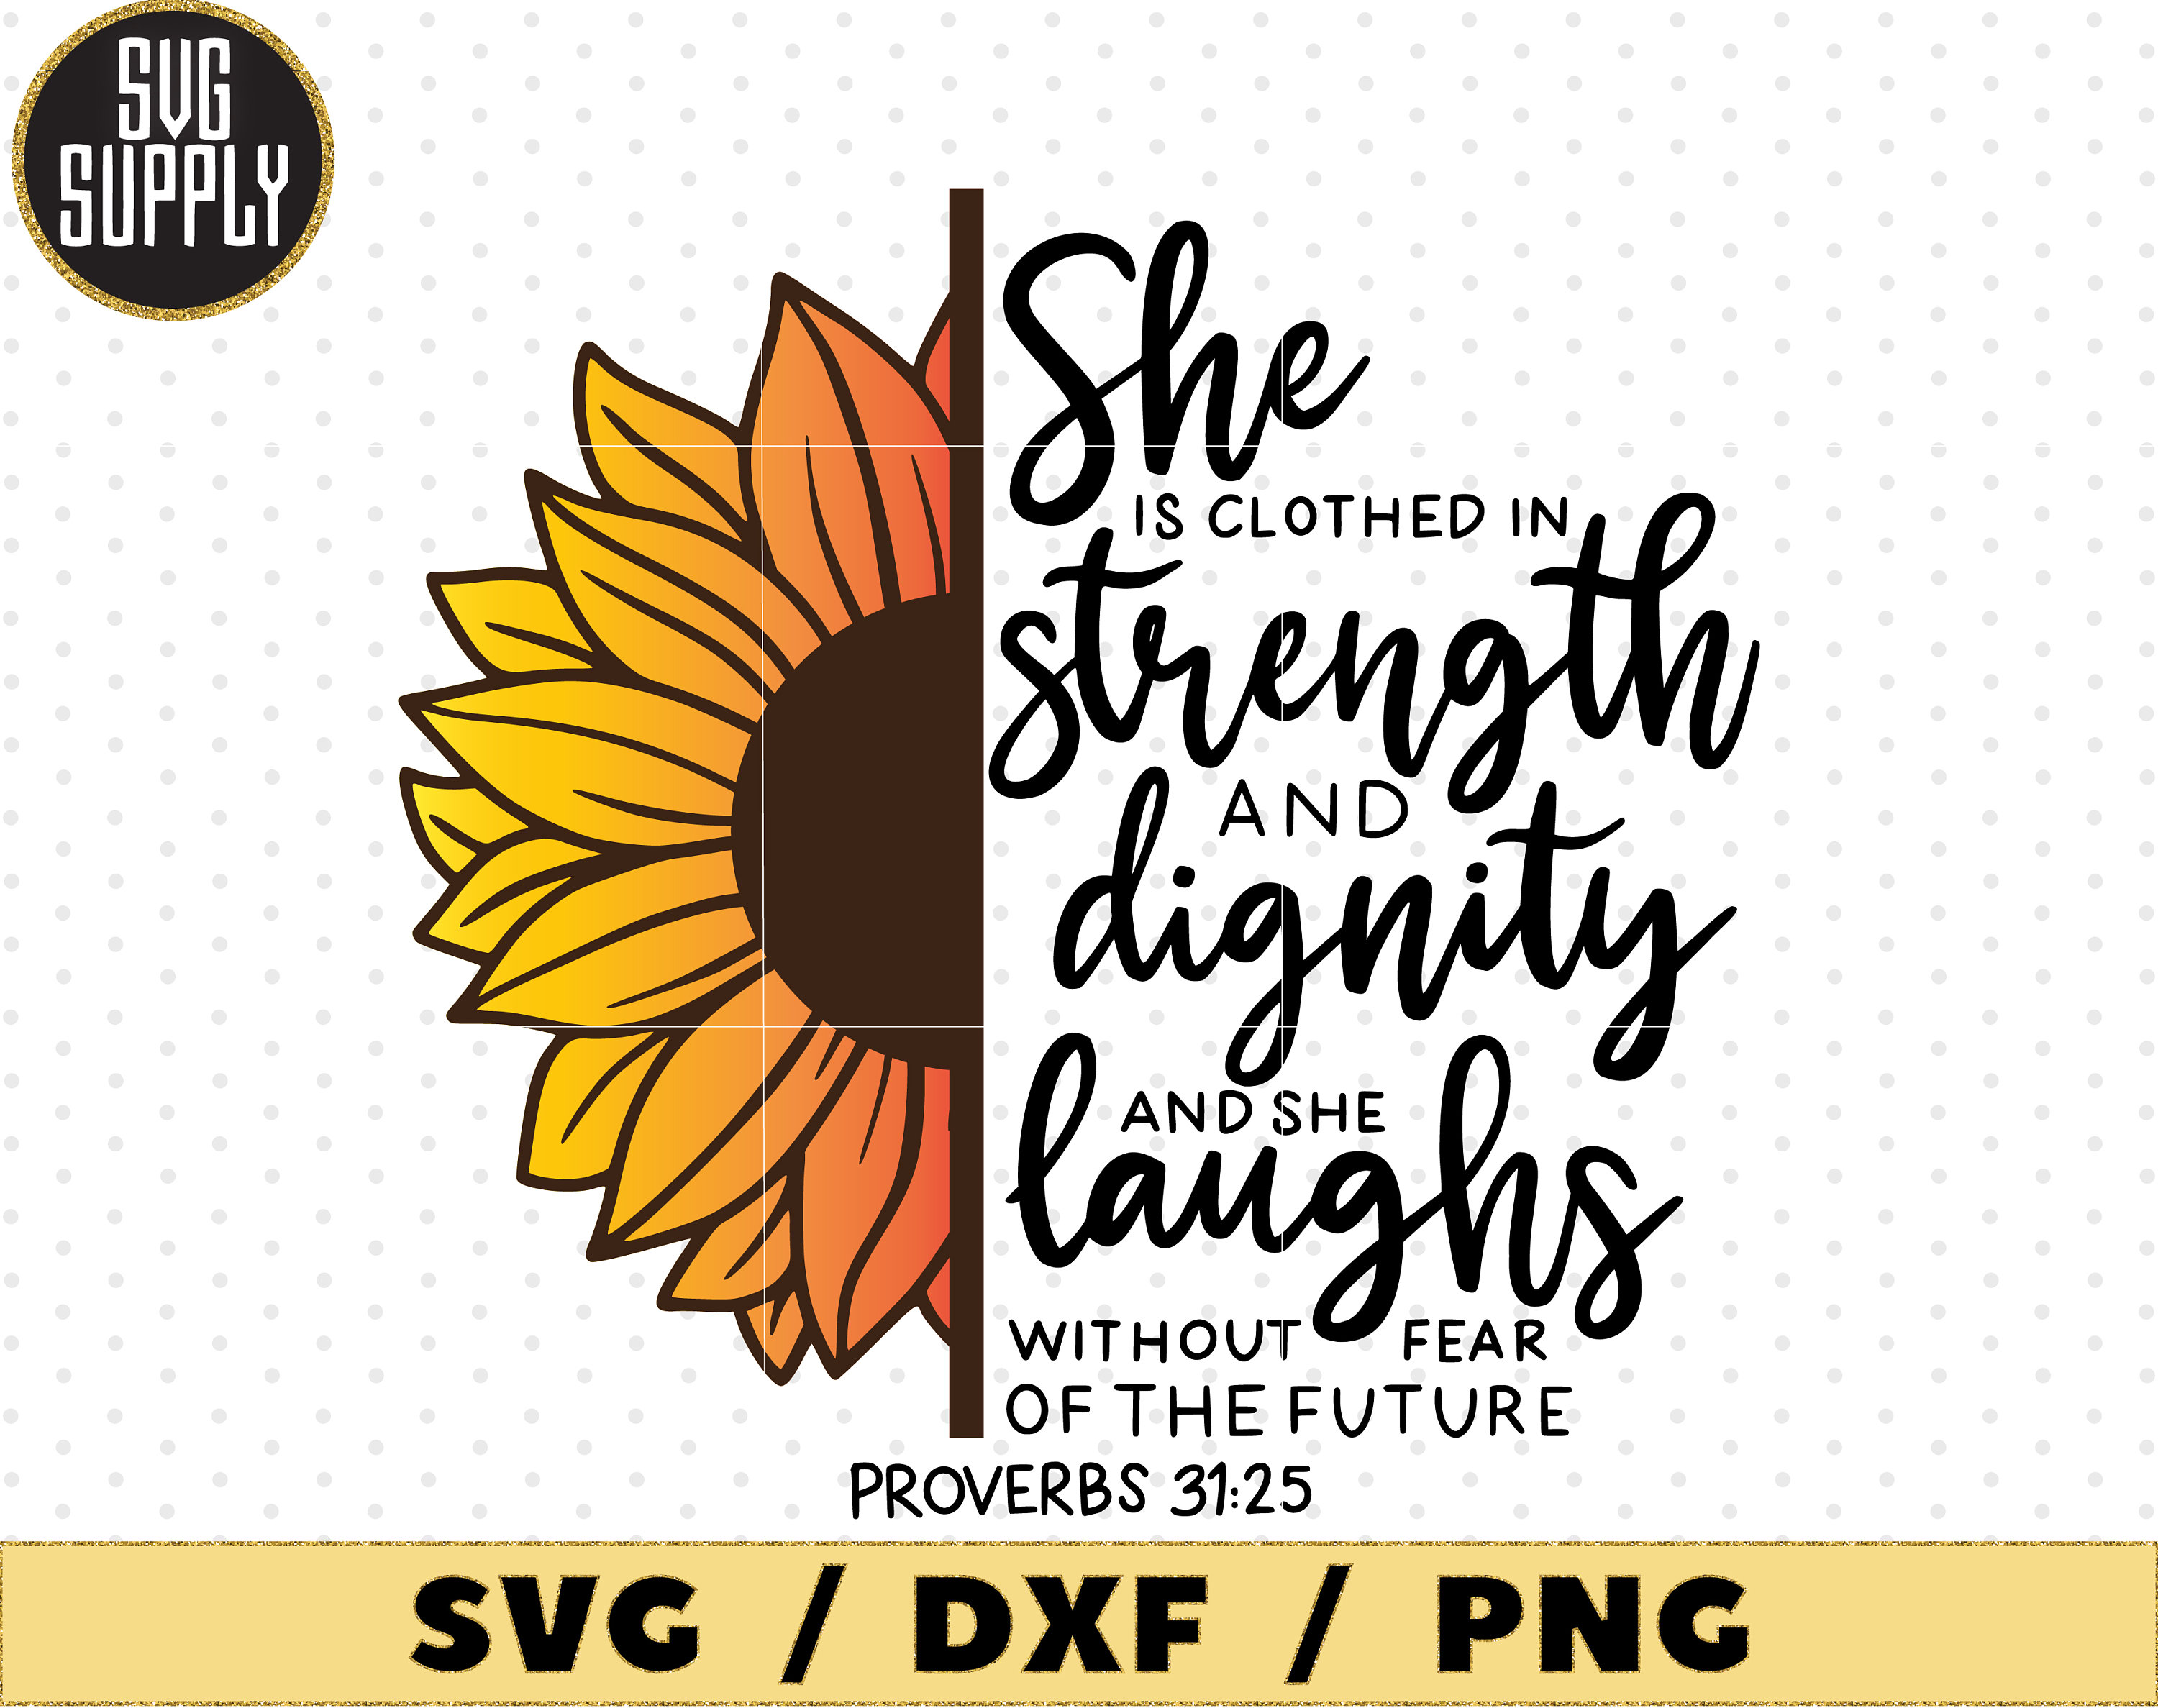 5. "She is clothed in strength and dignity" - wide 3